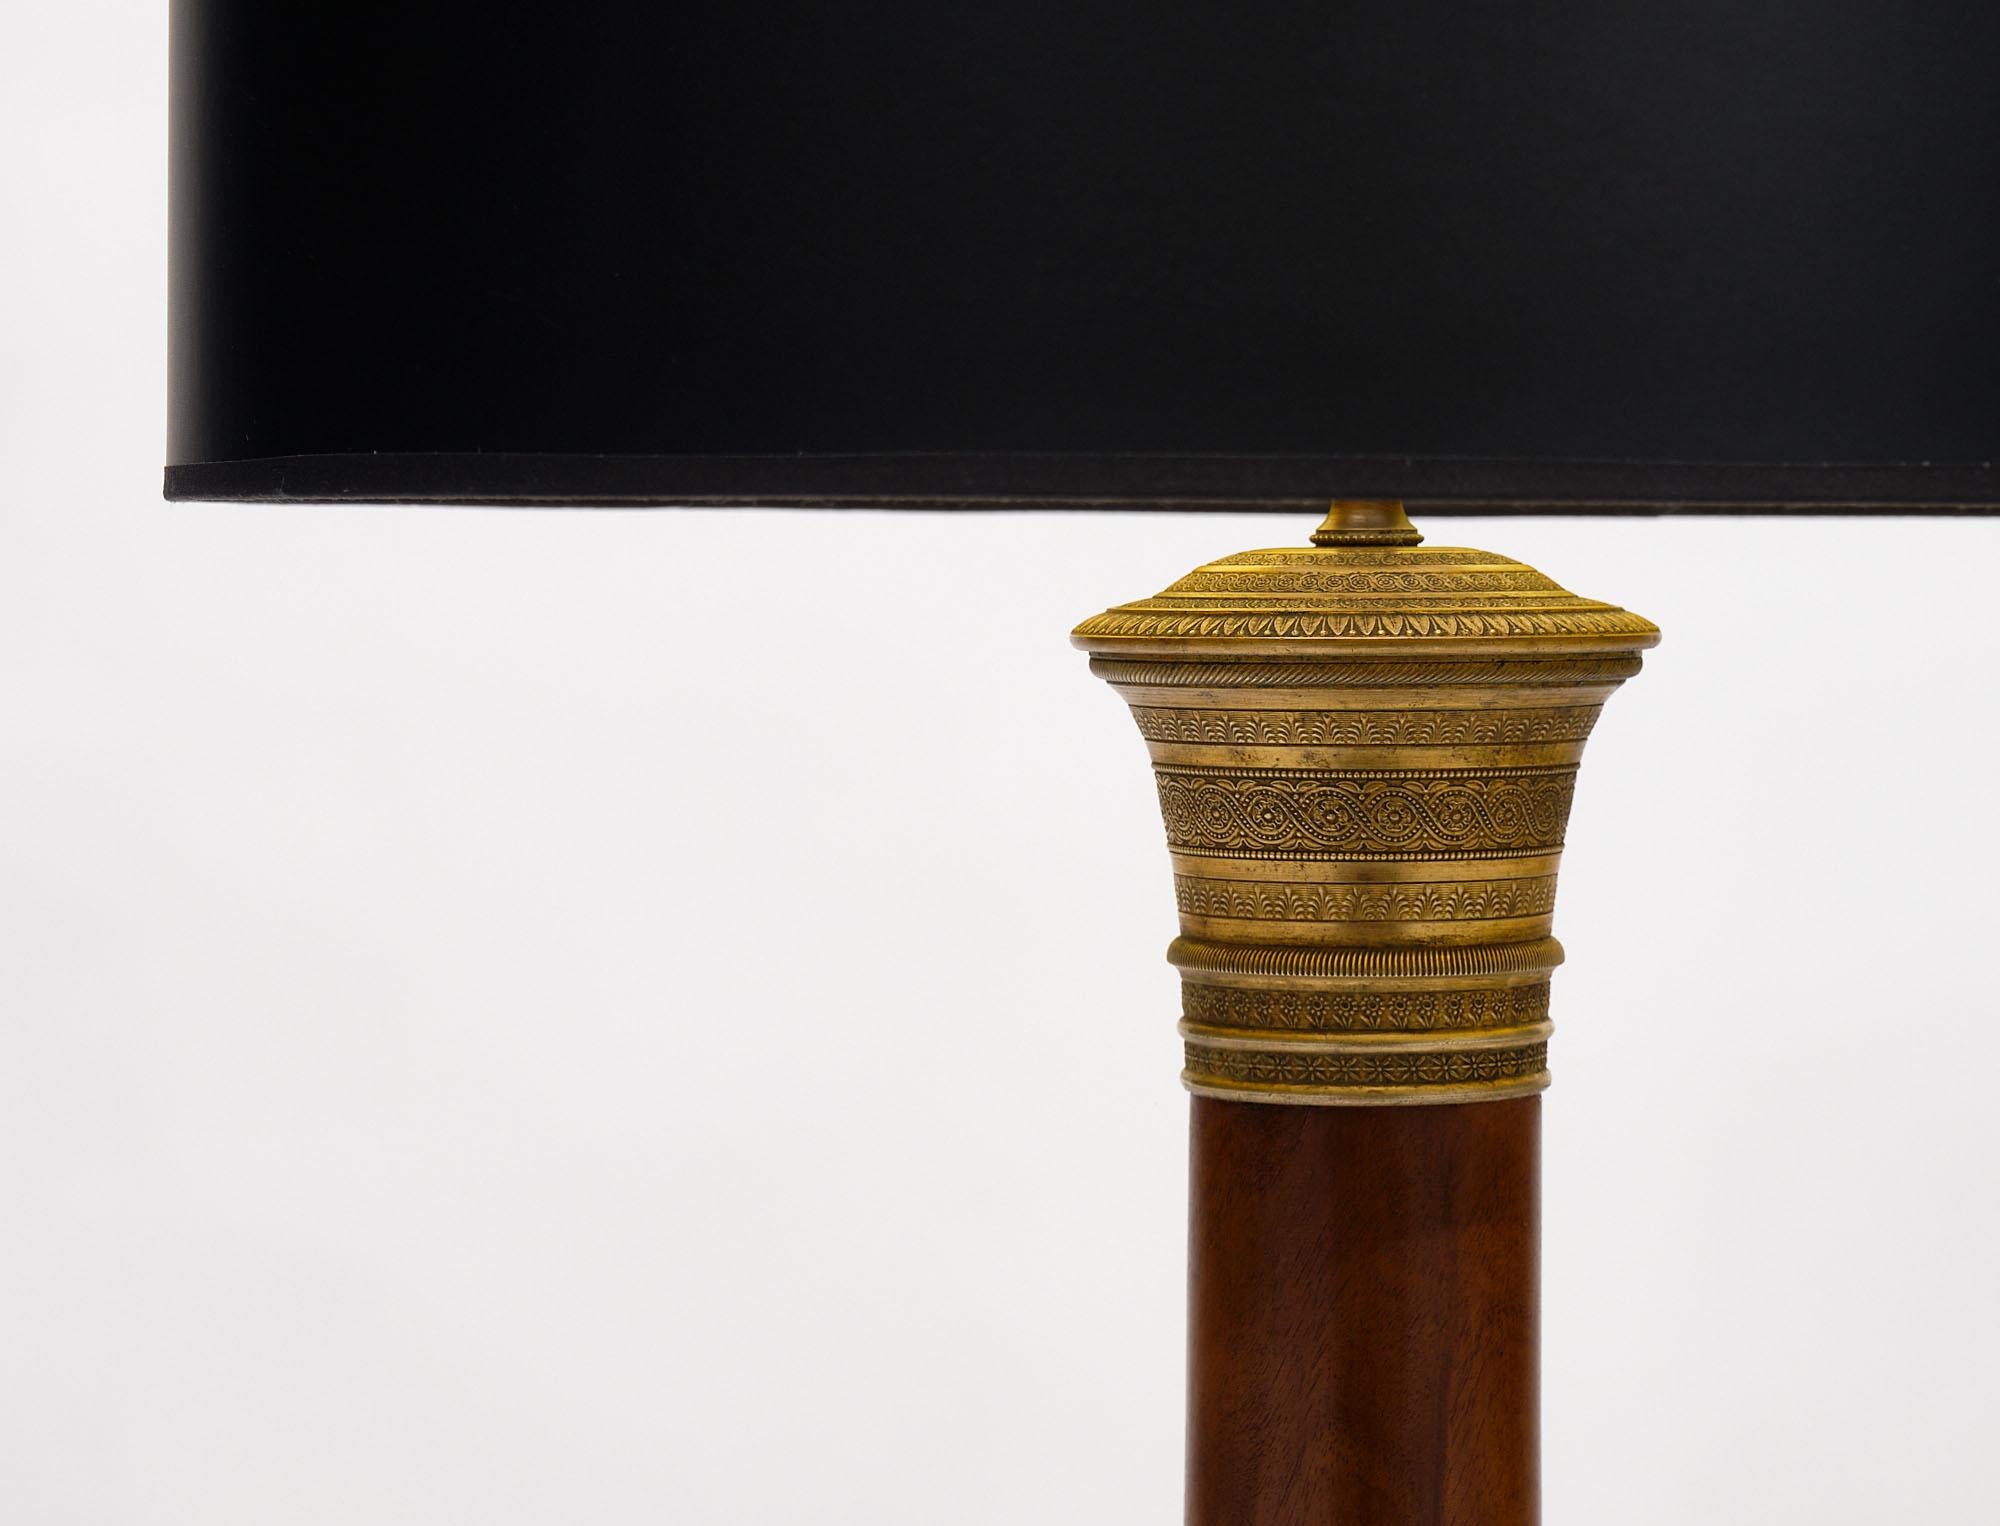 Floor lamp in the French empire style by Maison Jansen. This piece is made of mahogany with a tripod base and column leg finishing in a lustrous Museum quality French polish. The base has ebonized hand-carved claw feet. The lamp is adorned with